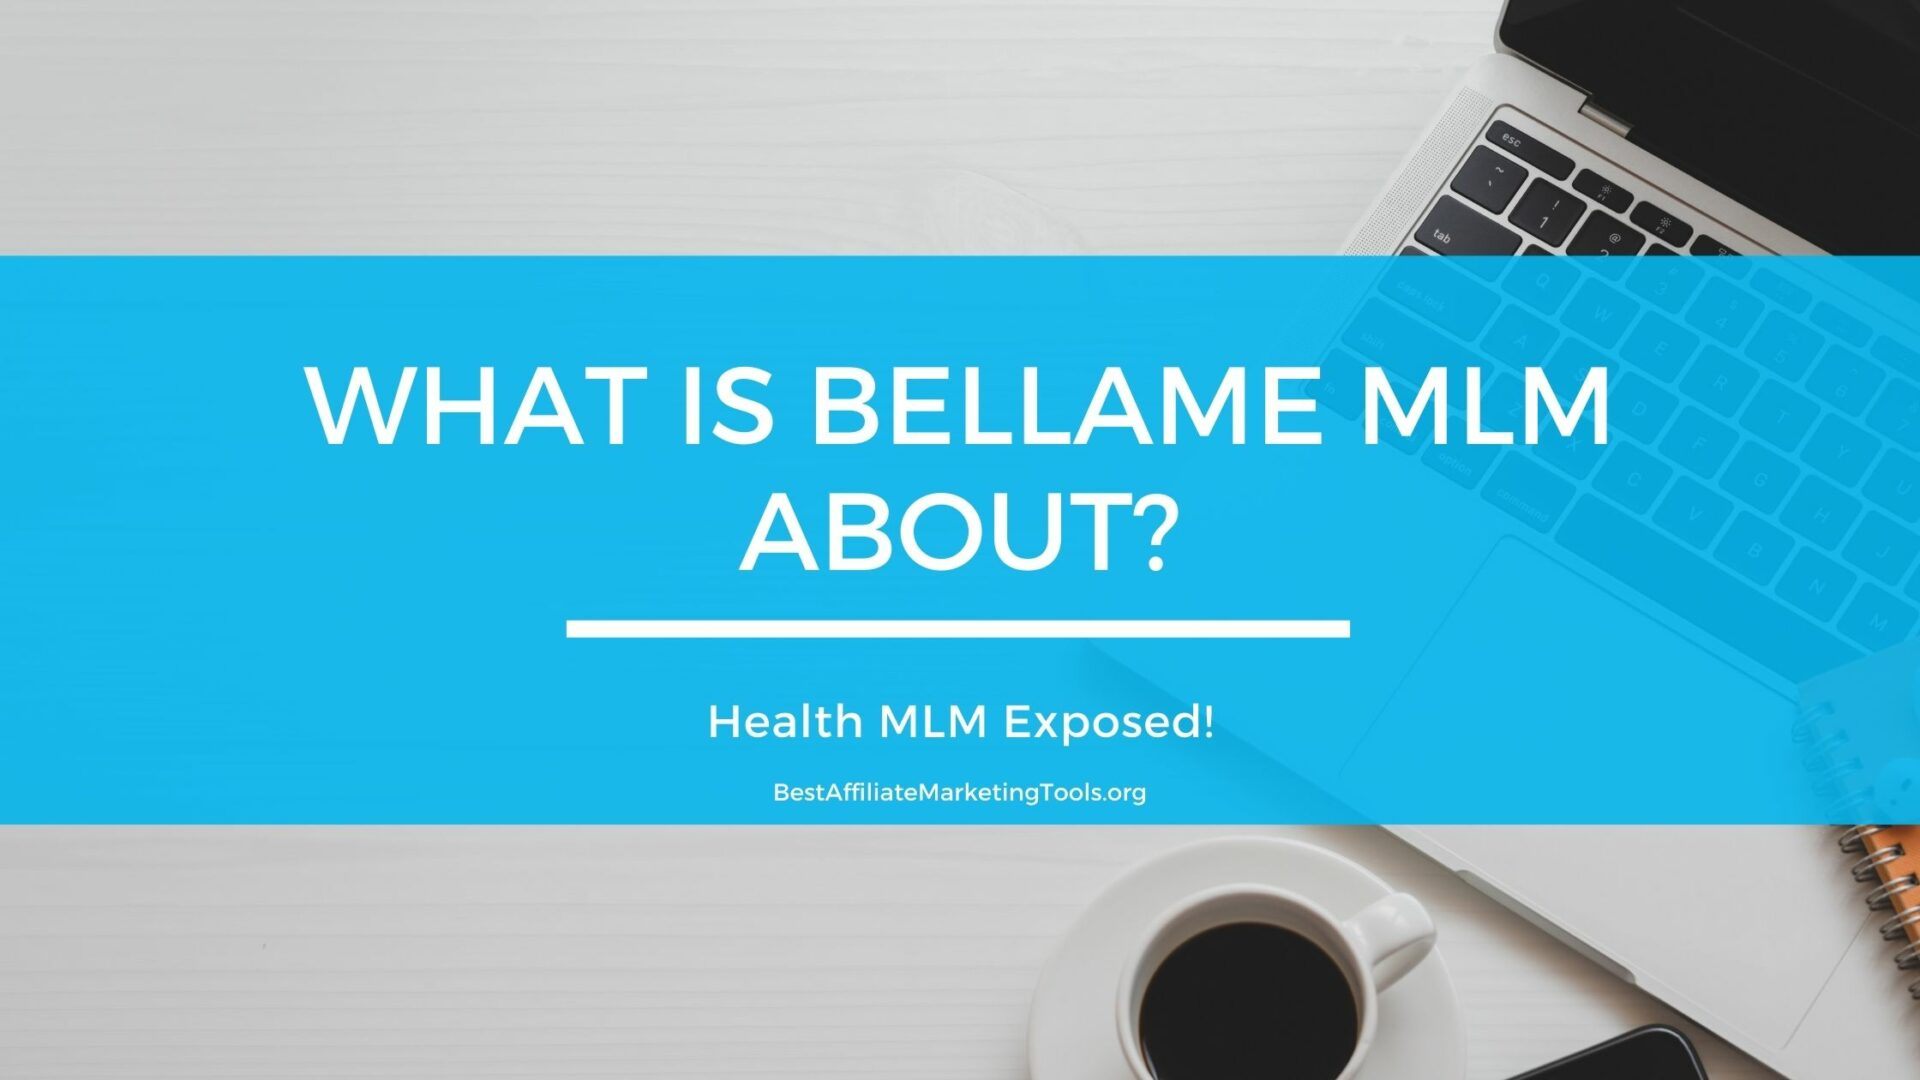 What Is Bellame MLM About